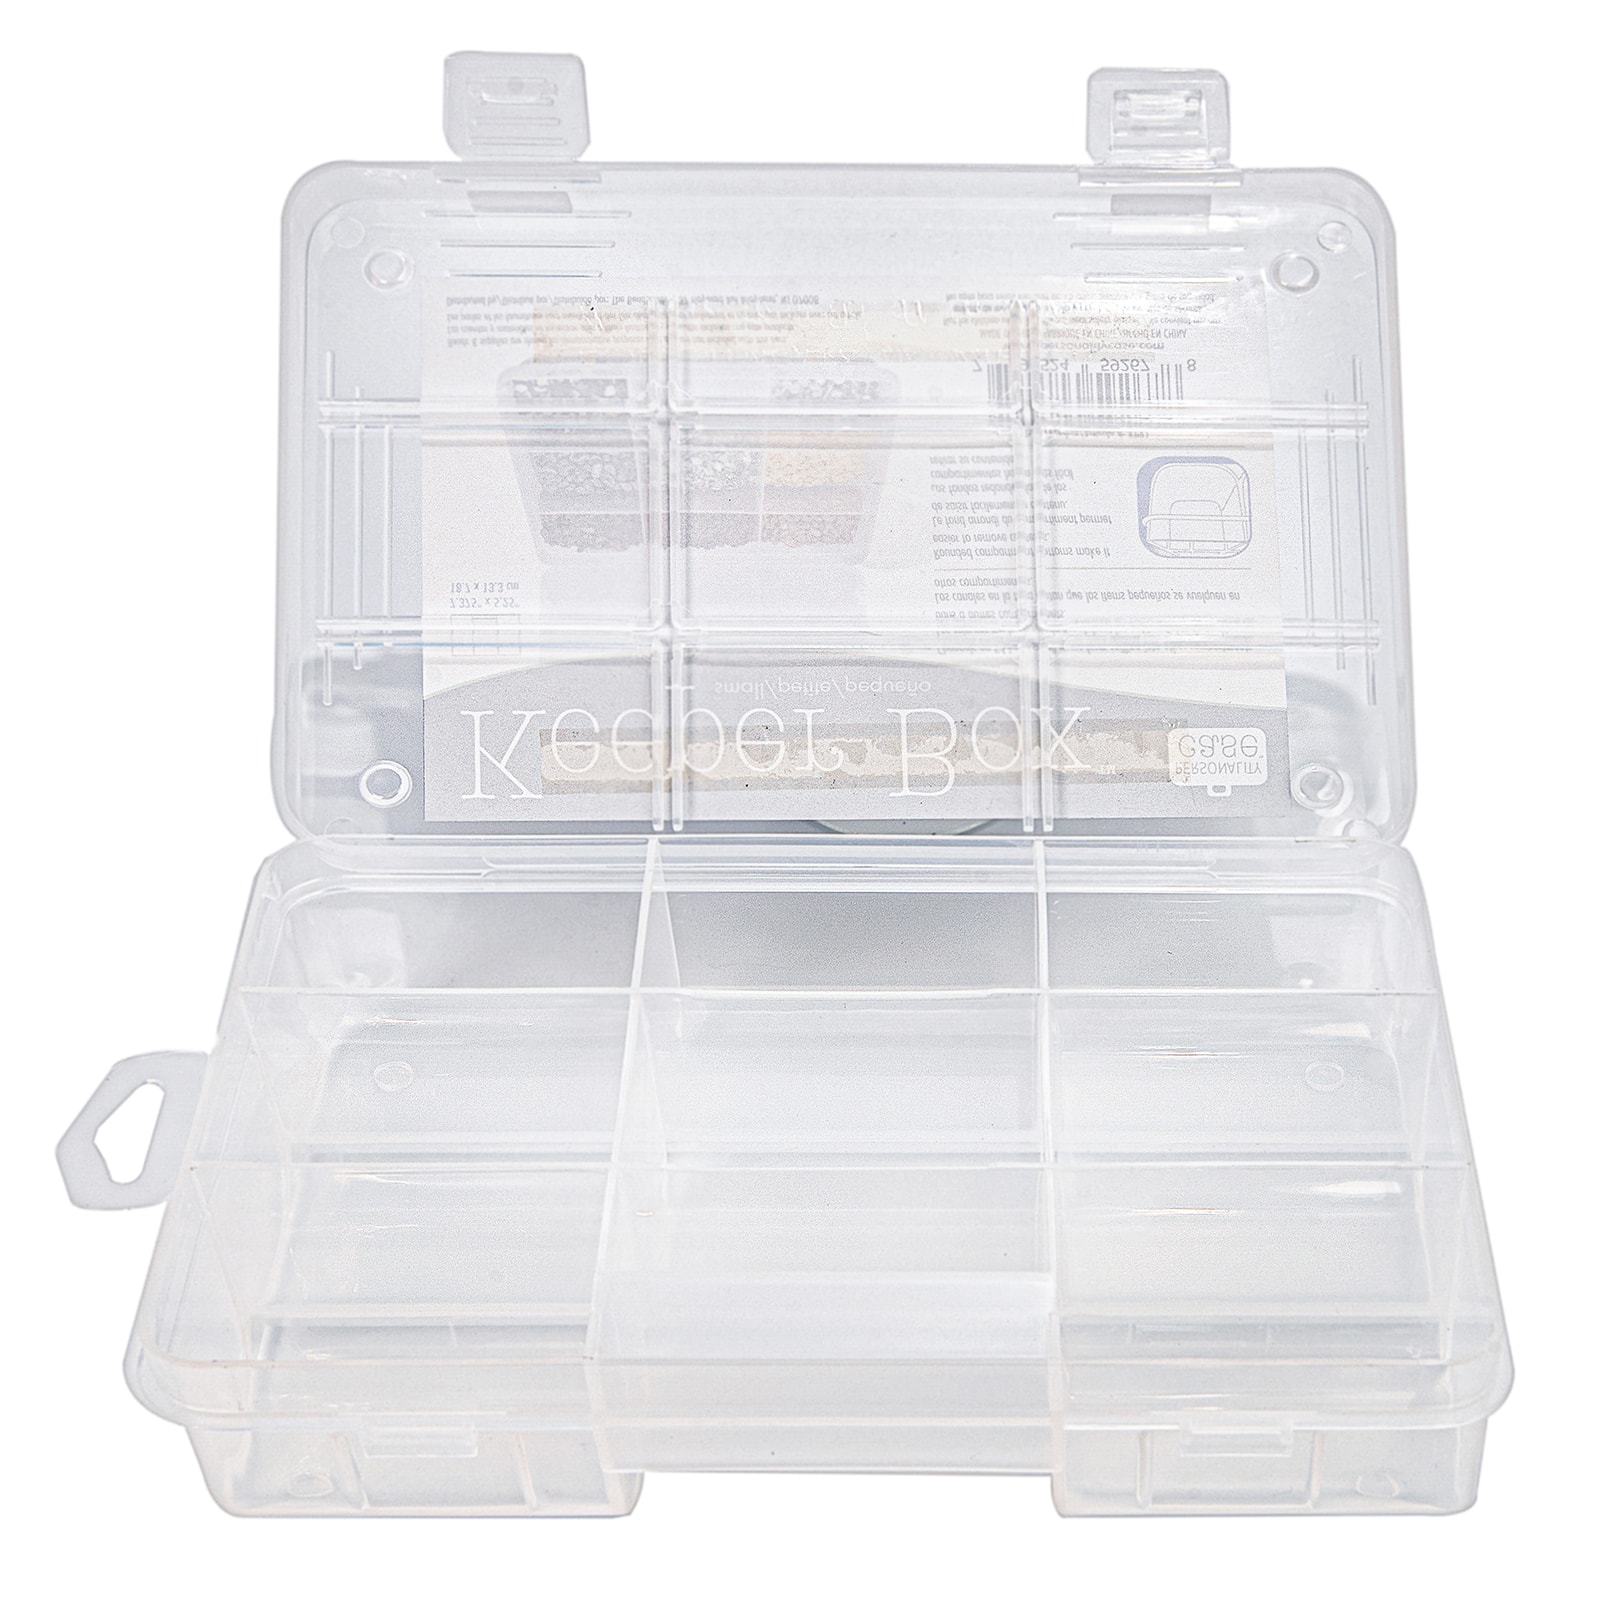 The Beadsmith Stackable 4 Box Organizer | Michaels